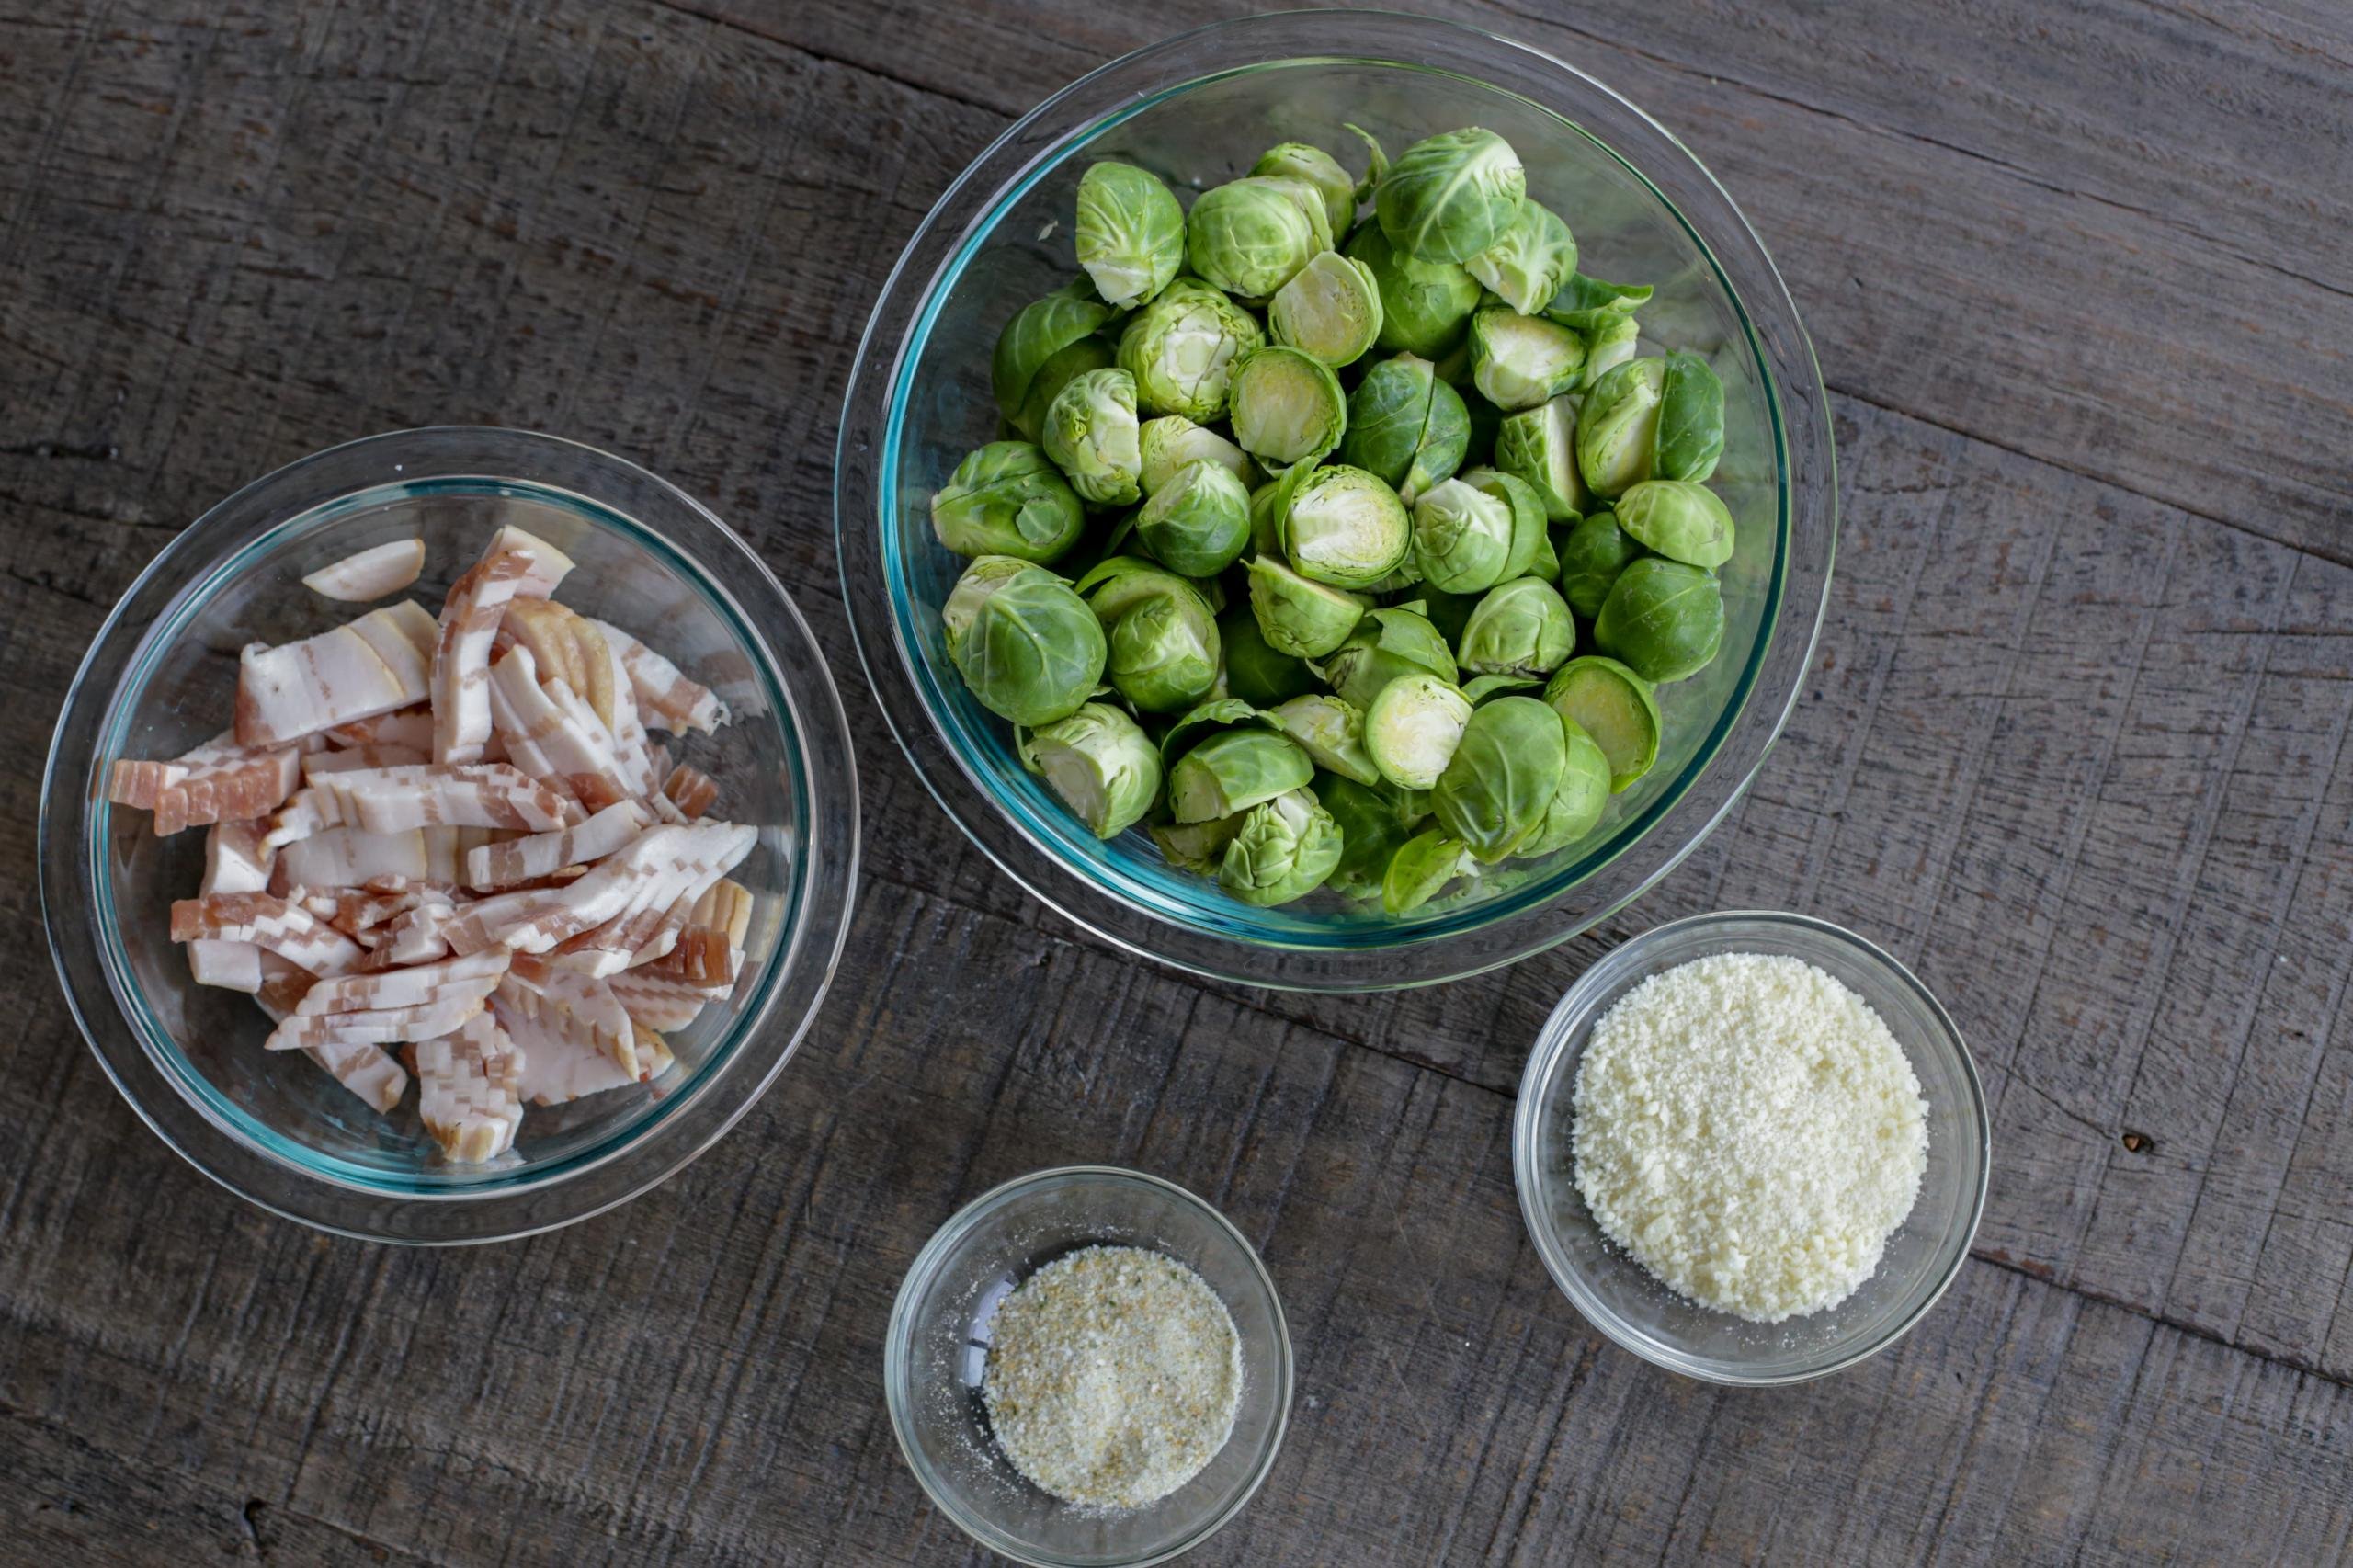 Ingredients for Brussel Sprouts salad